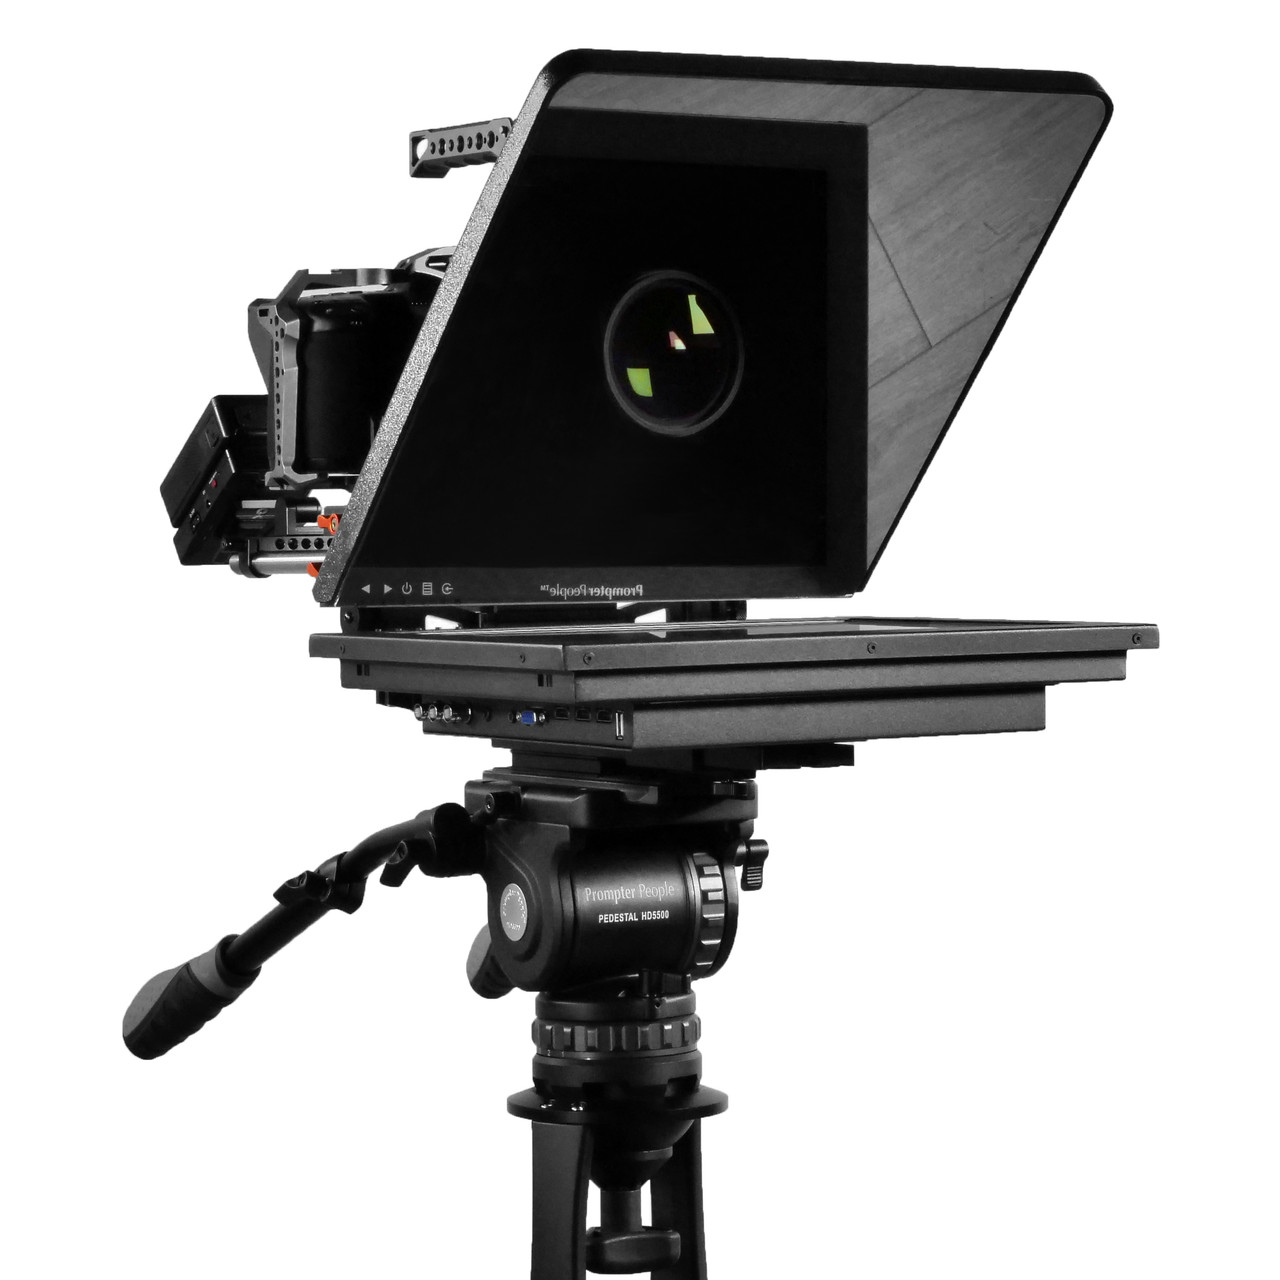 ProLine Plus 15" 15MM | 3G-SDI | HDMI Teleprompter 1000 NIT and 400 NIT Prompting Monitor